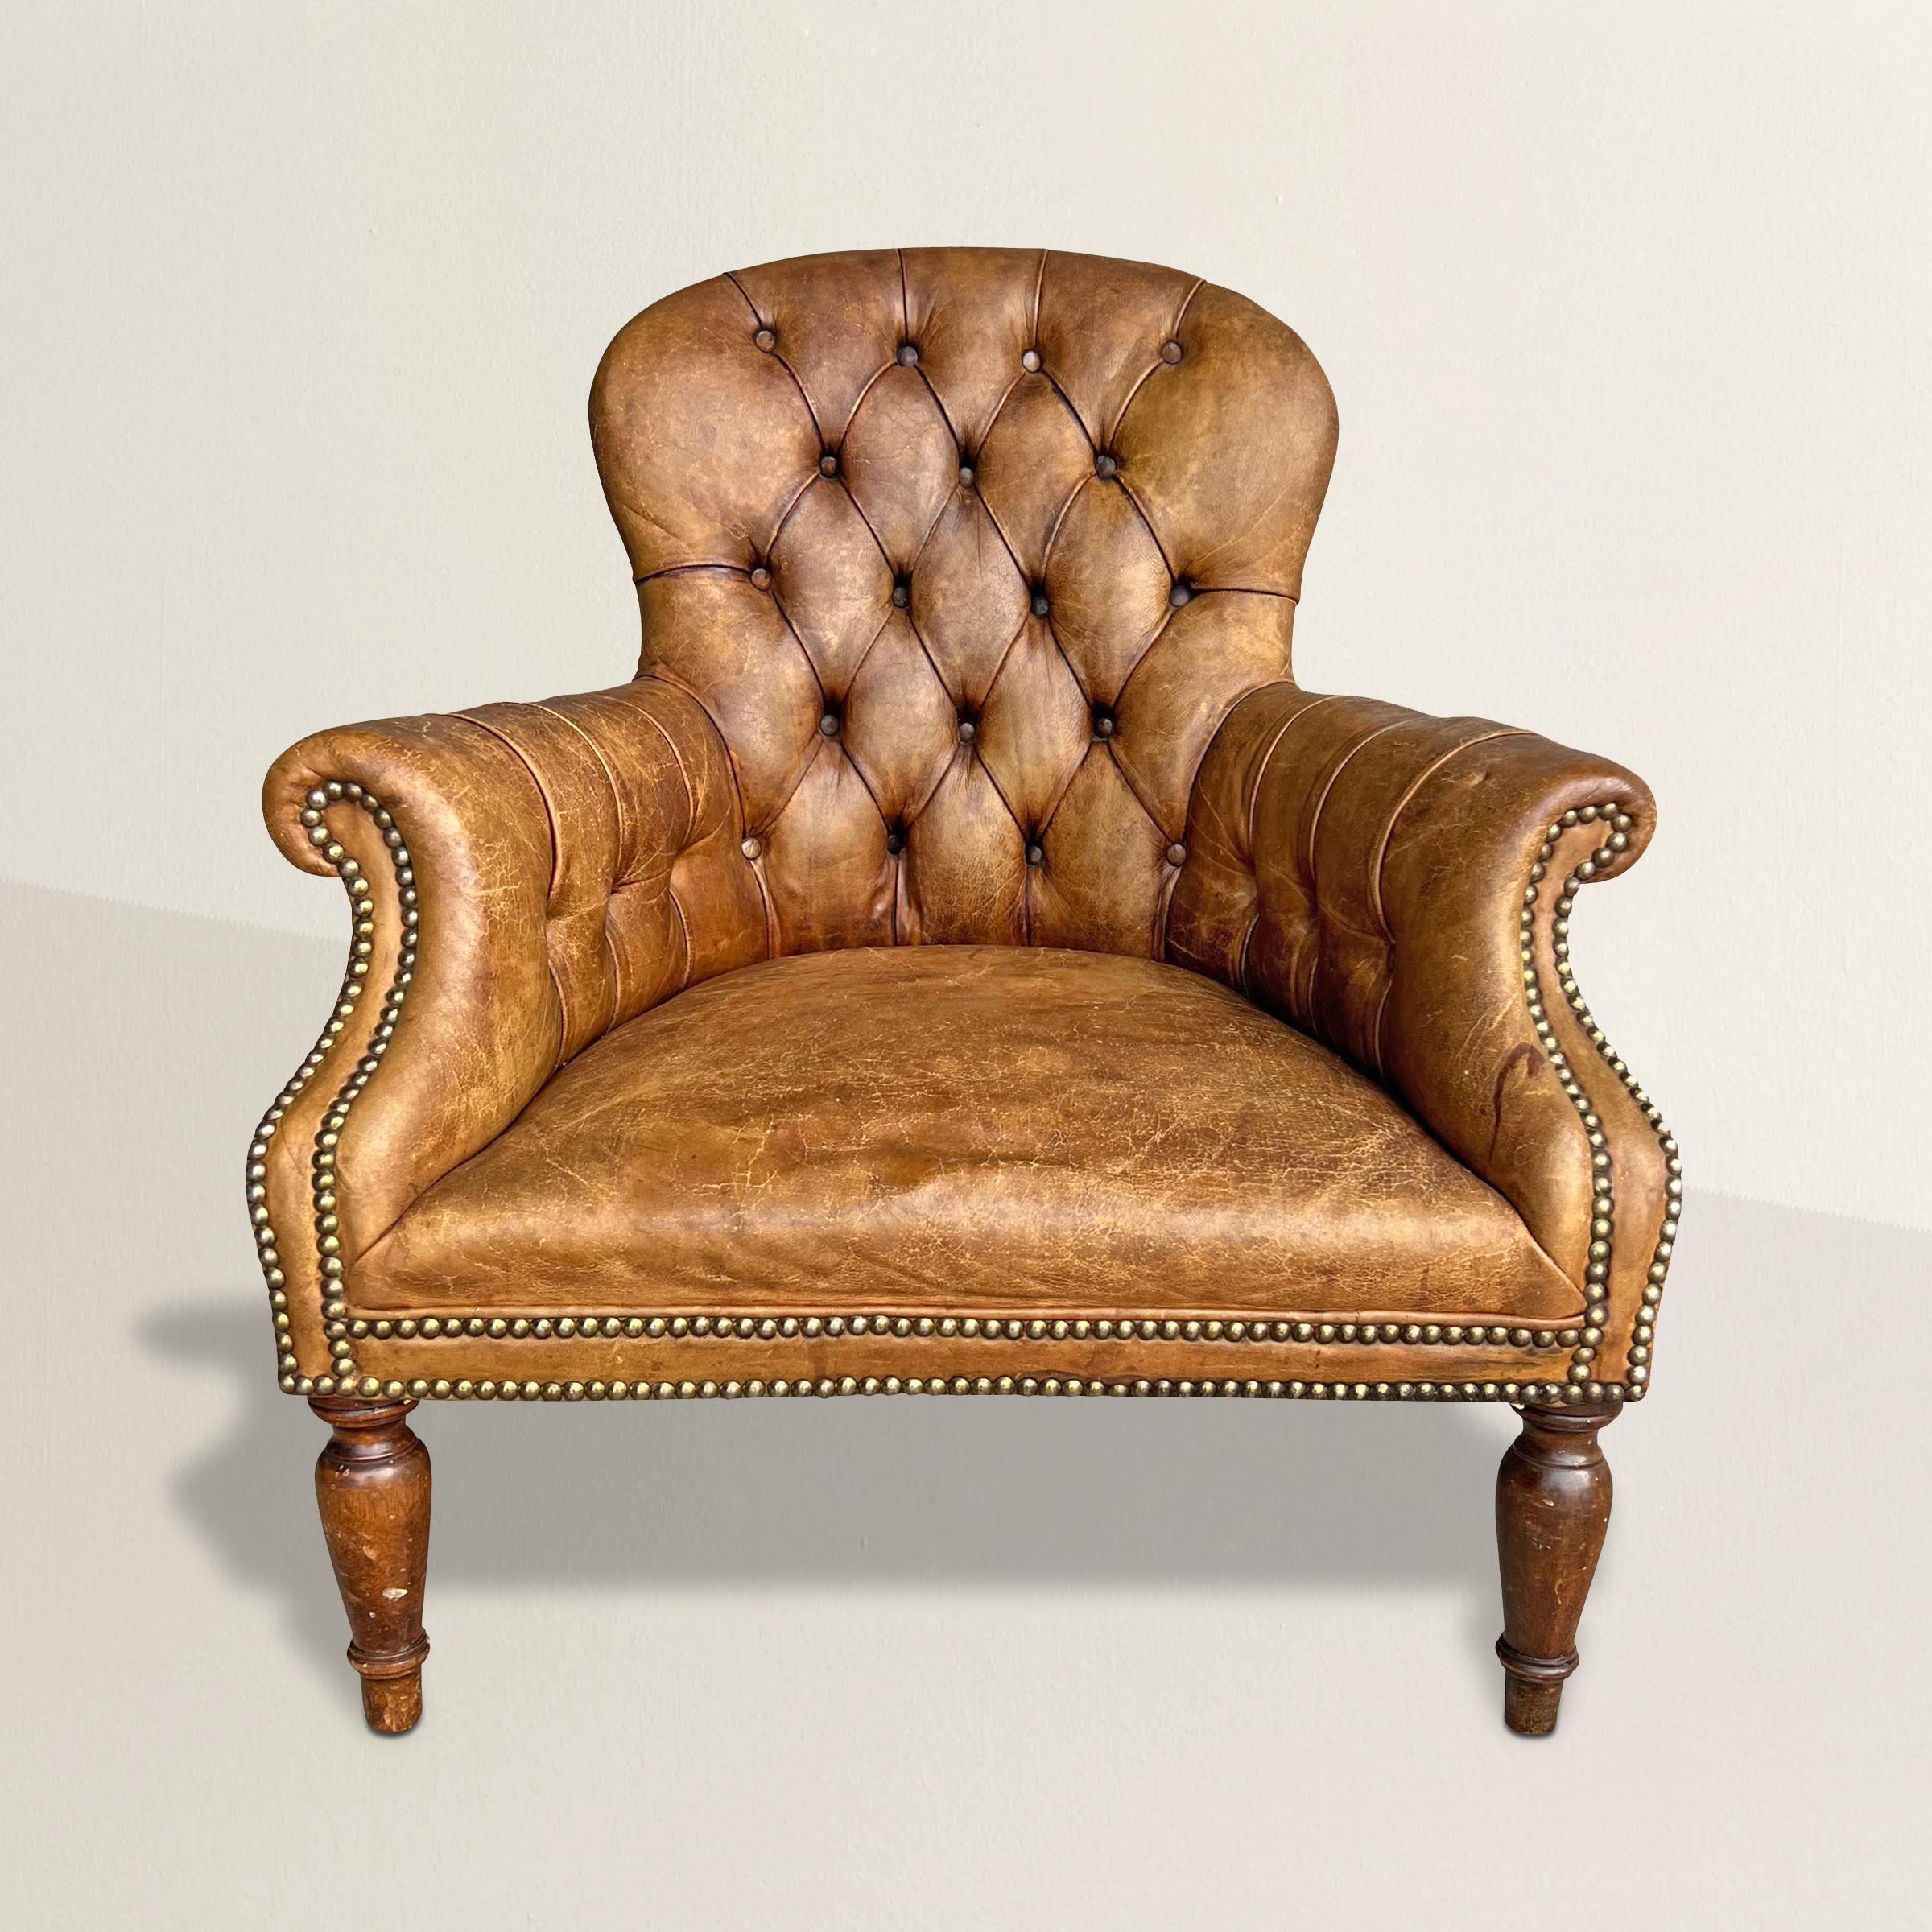 Indulge in the timeless allure of the Napoleon III era with this exquisite 20th-century French tufted leather armchair, thoughtfully executed in the grandeur of the Second Empire style. Drawing inspiration from the period's penchant for eclecticism,